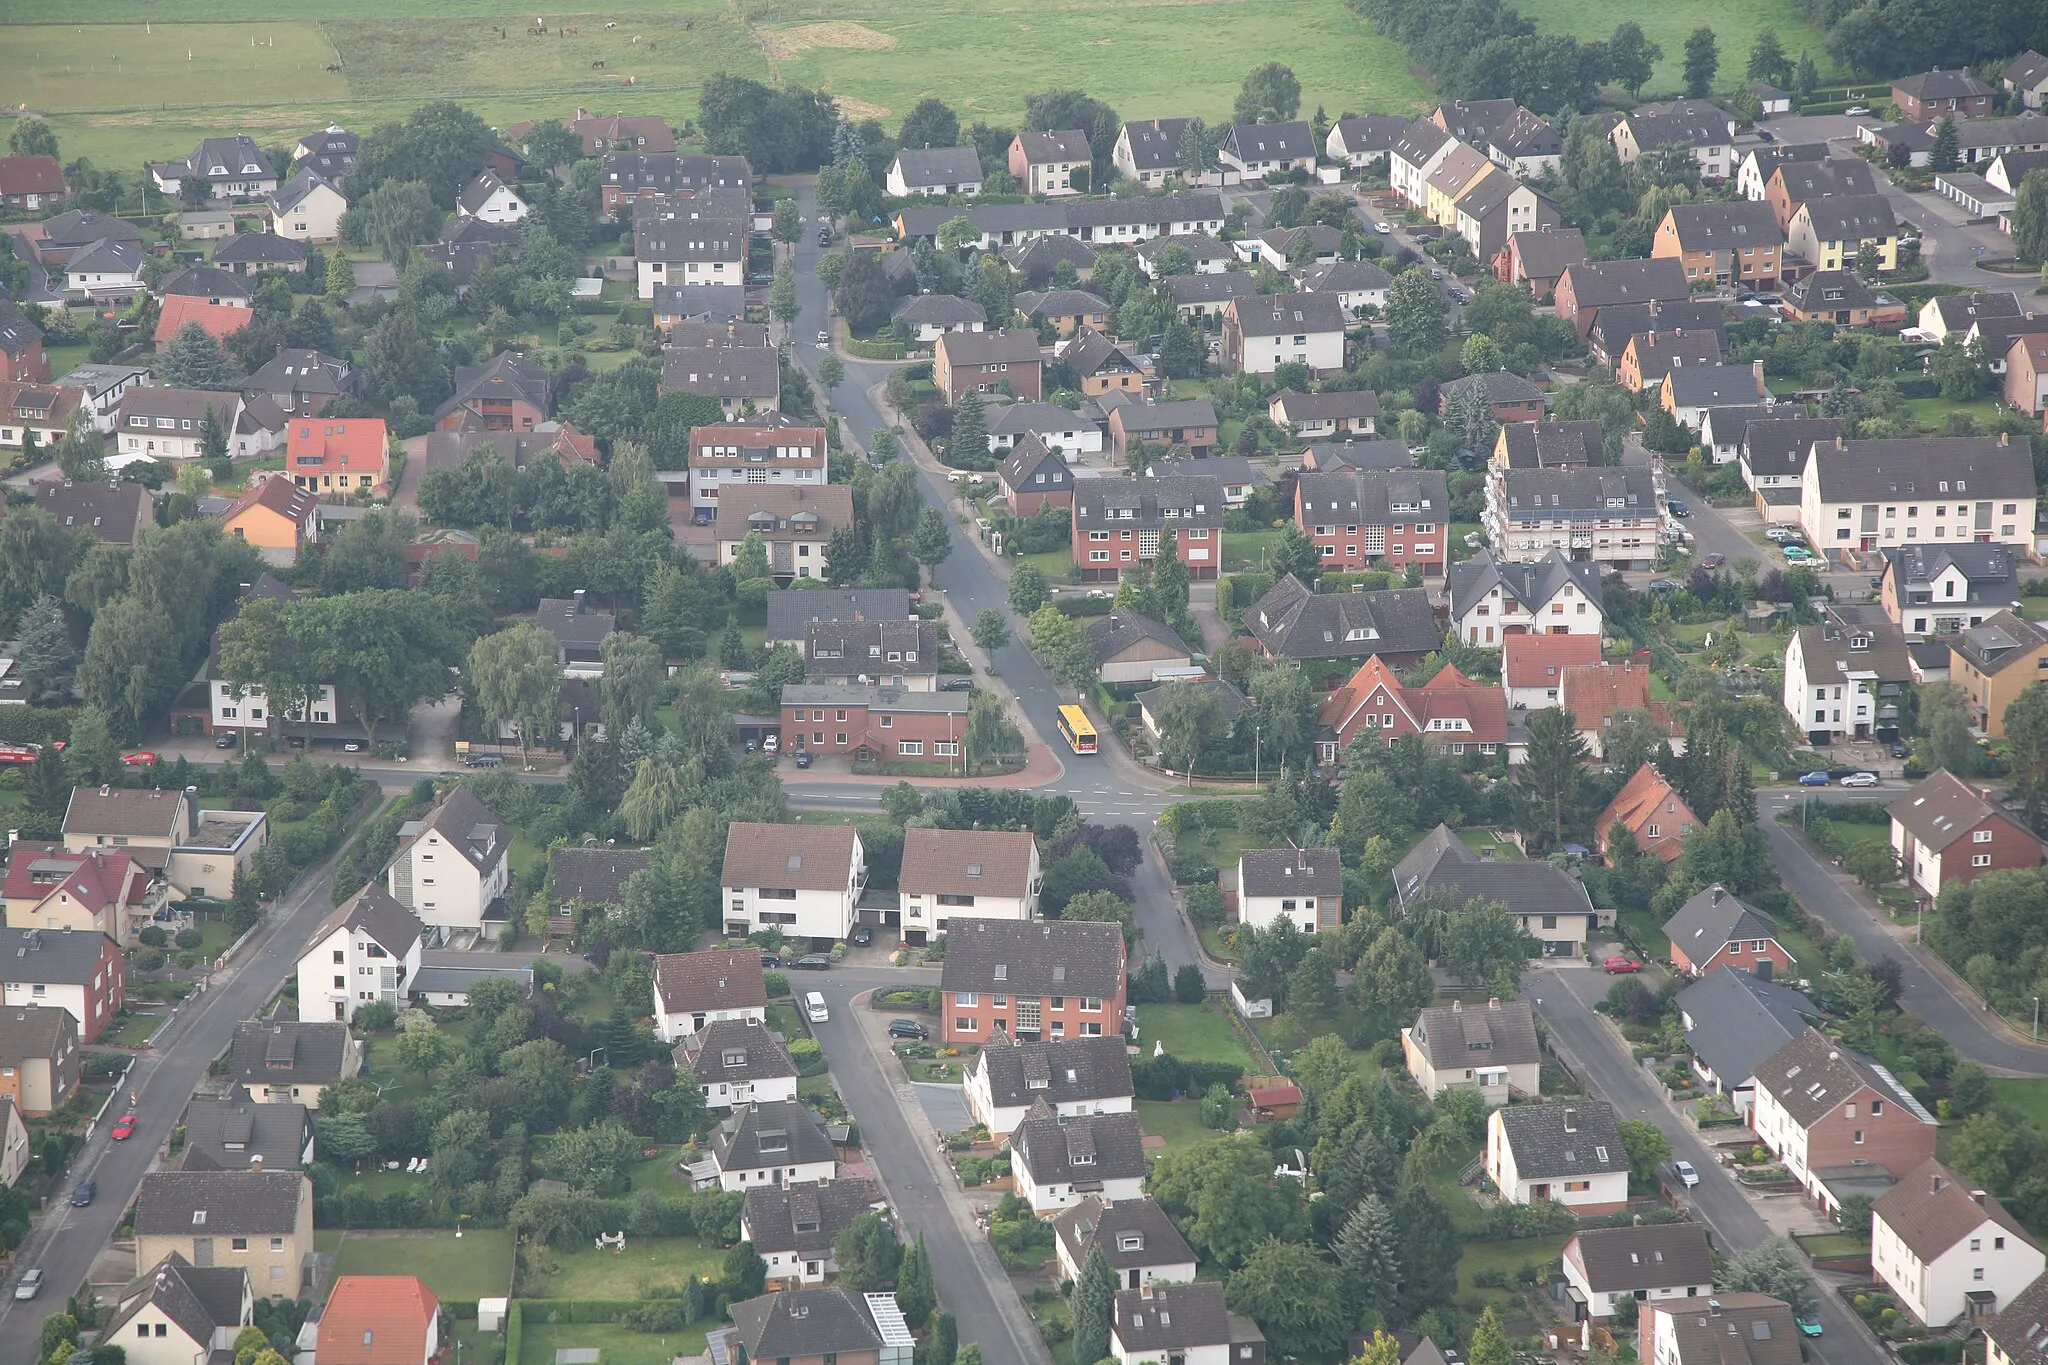 Photo showing: Suburban impression of Stelingen (a part of Garbsen near Hannover) from above. Taken in approach of Hannover airport, Germany. The intersection with the bus in the center of the frame is located at the above coordinates.